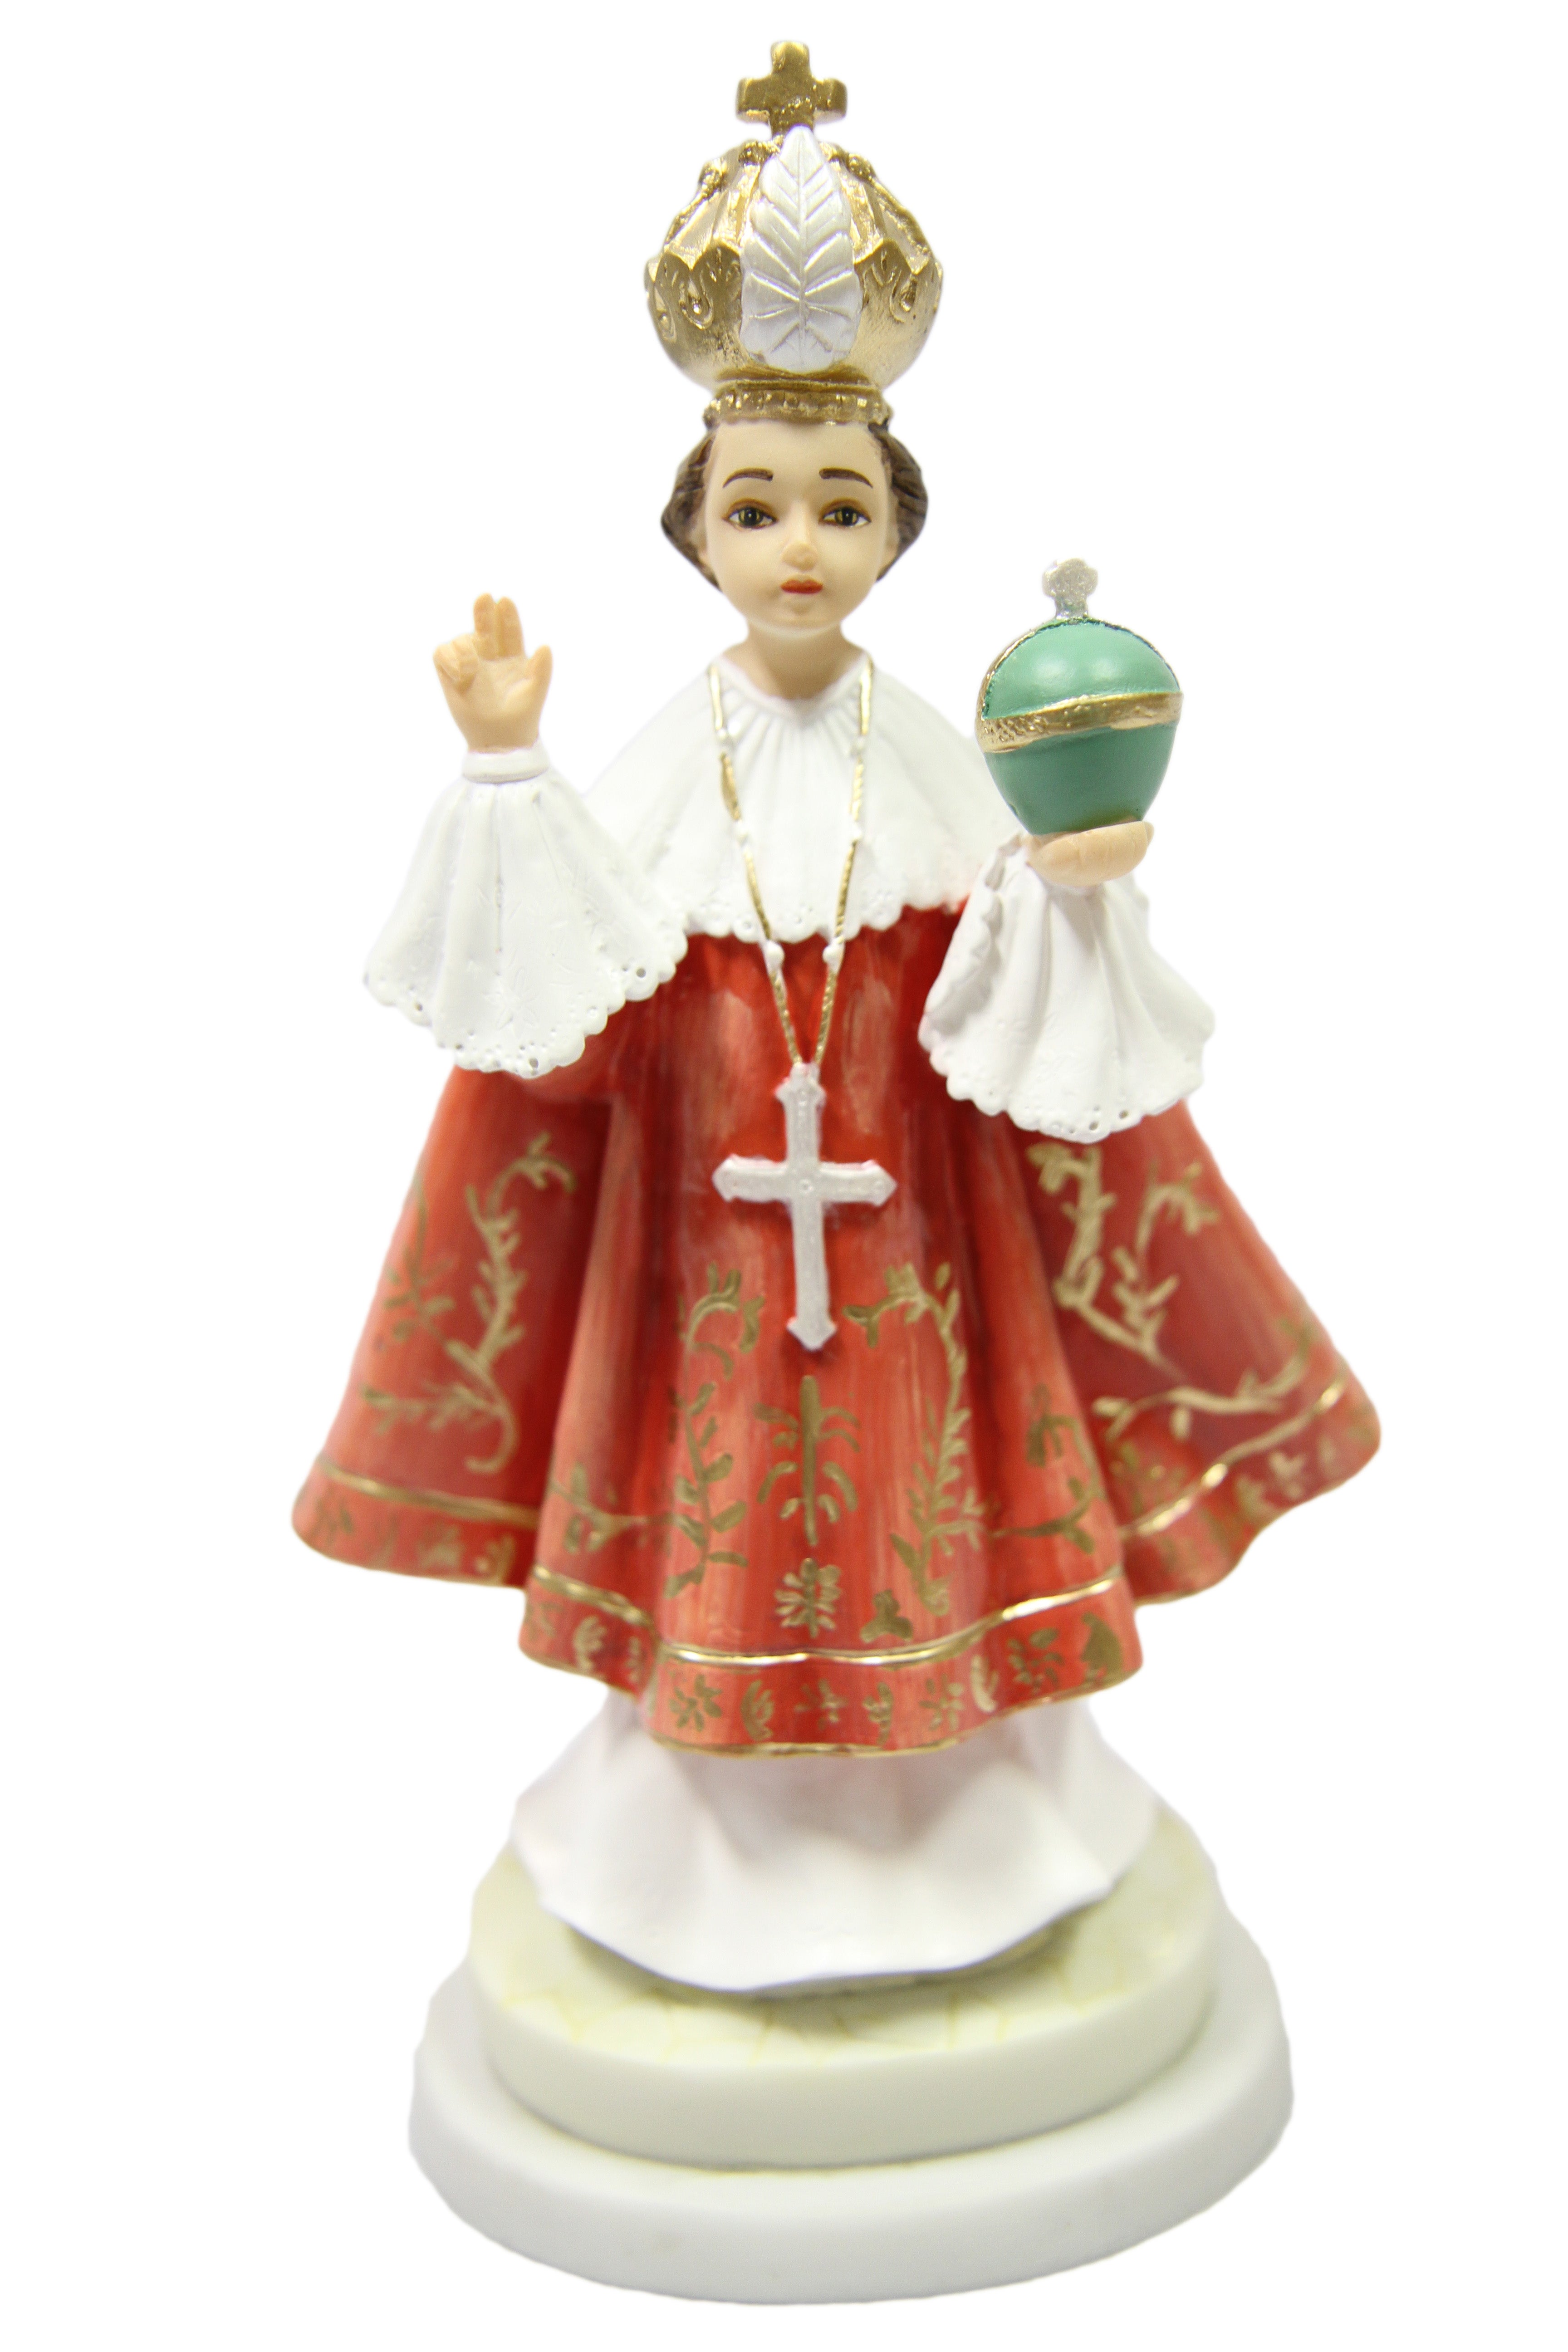 8" Inch Infant Child Jesus of Prague Catholic Statue Vittoria Collection Made in Italy